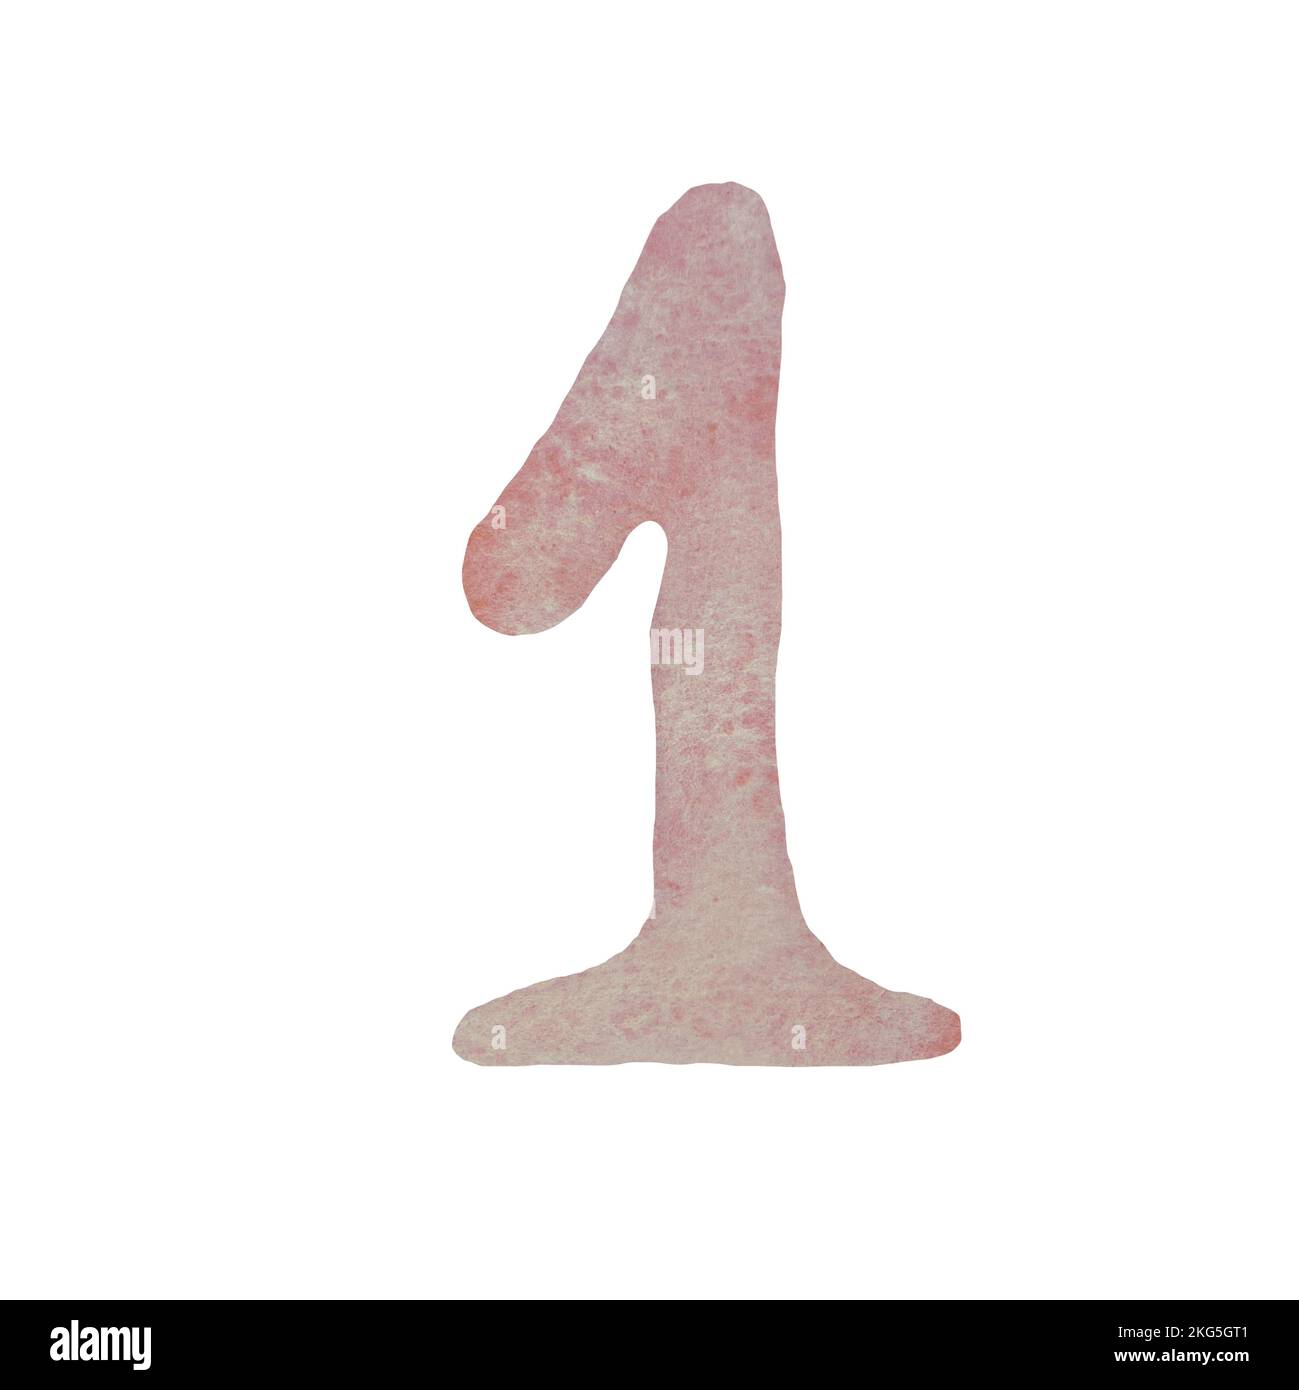 Number one figure pink a watercolor illustration Stock Photo